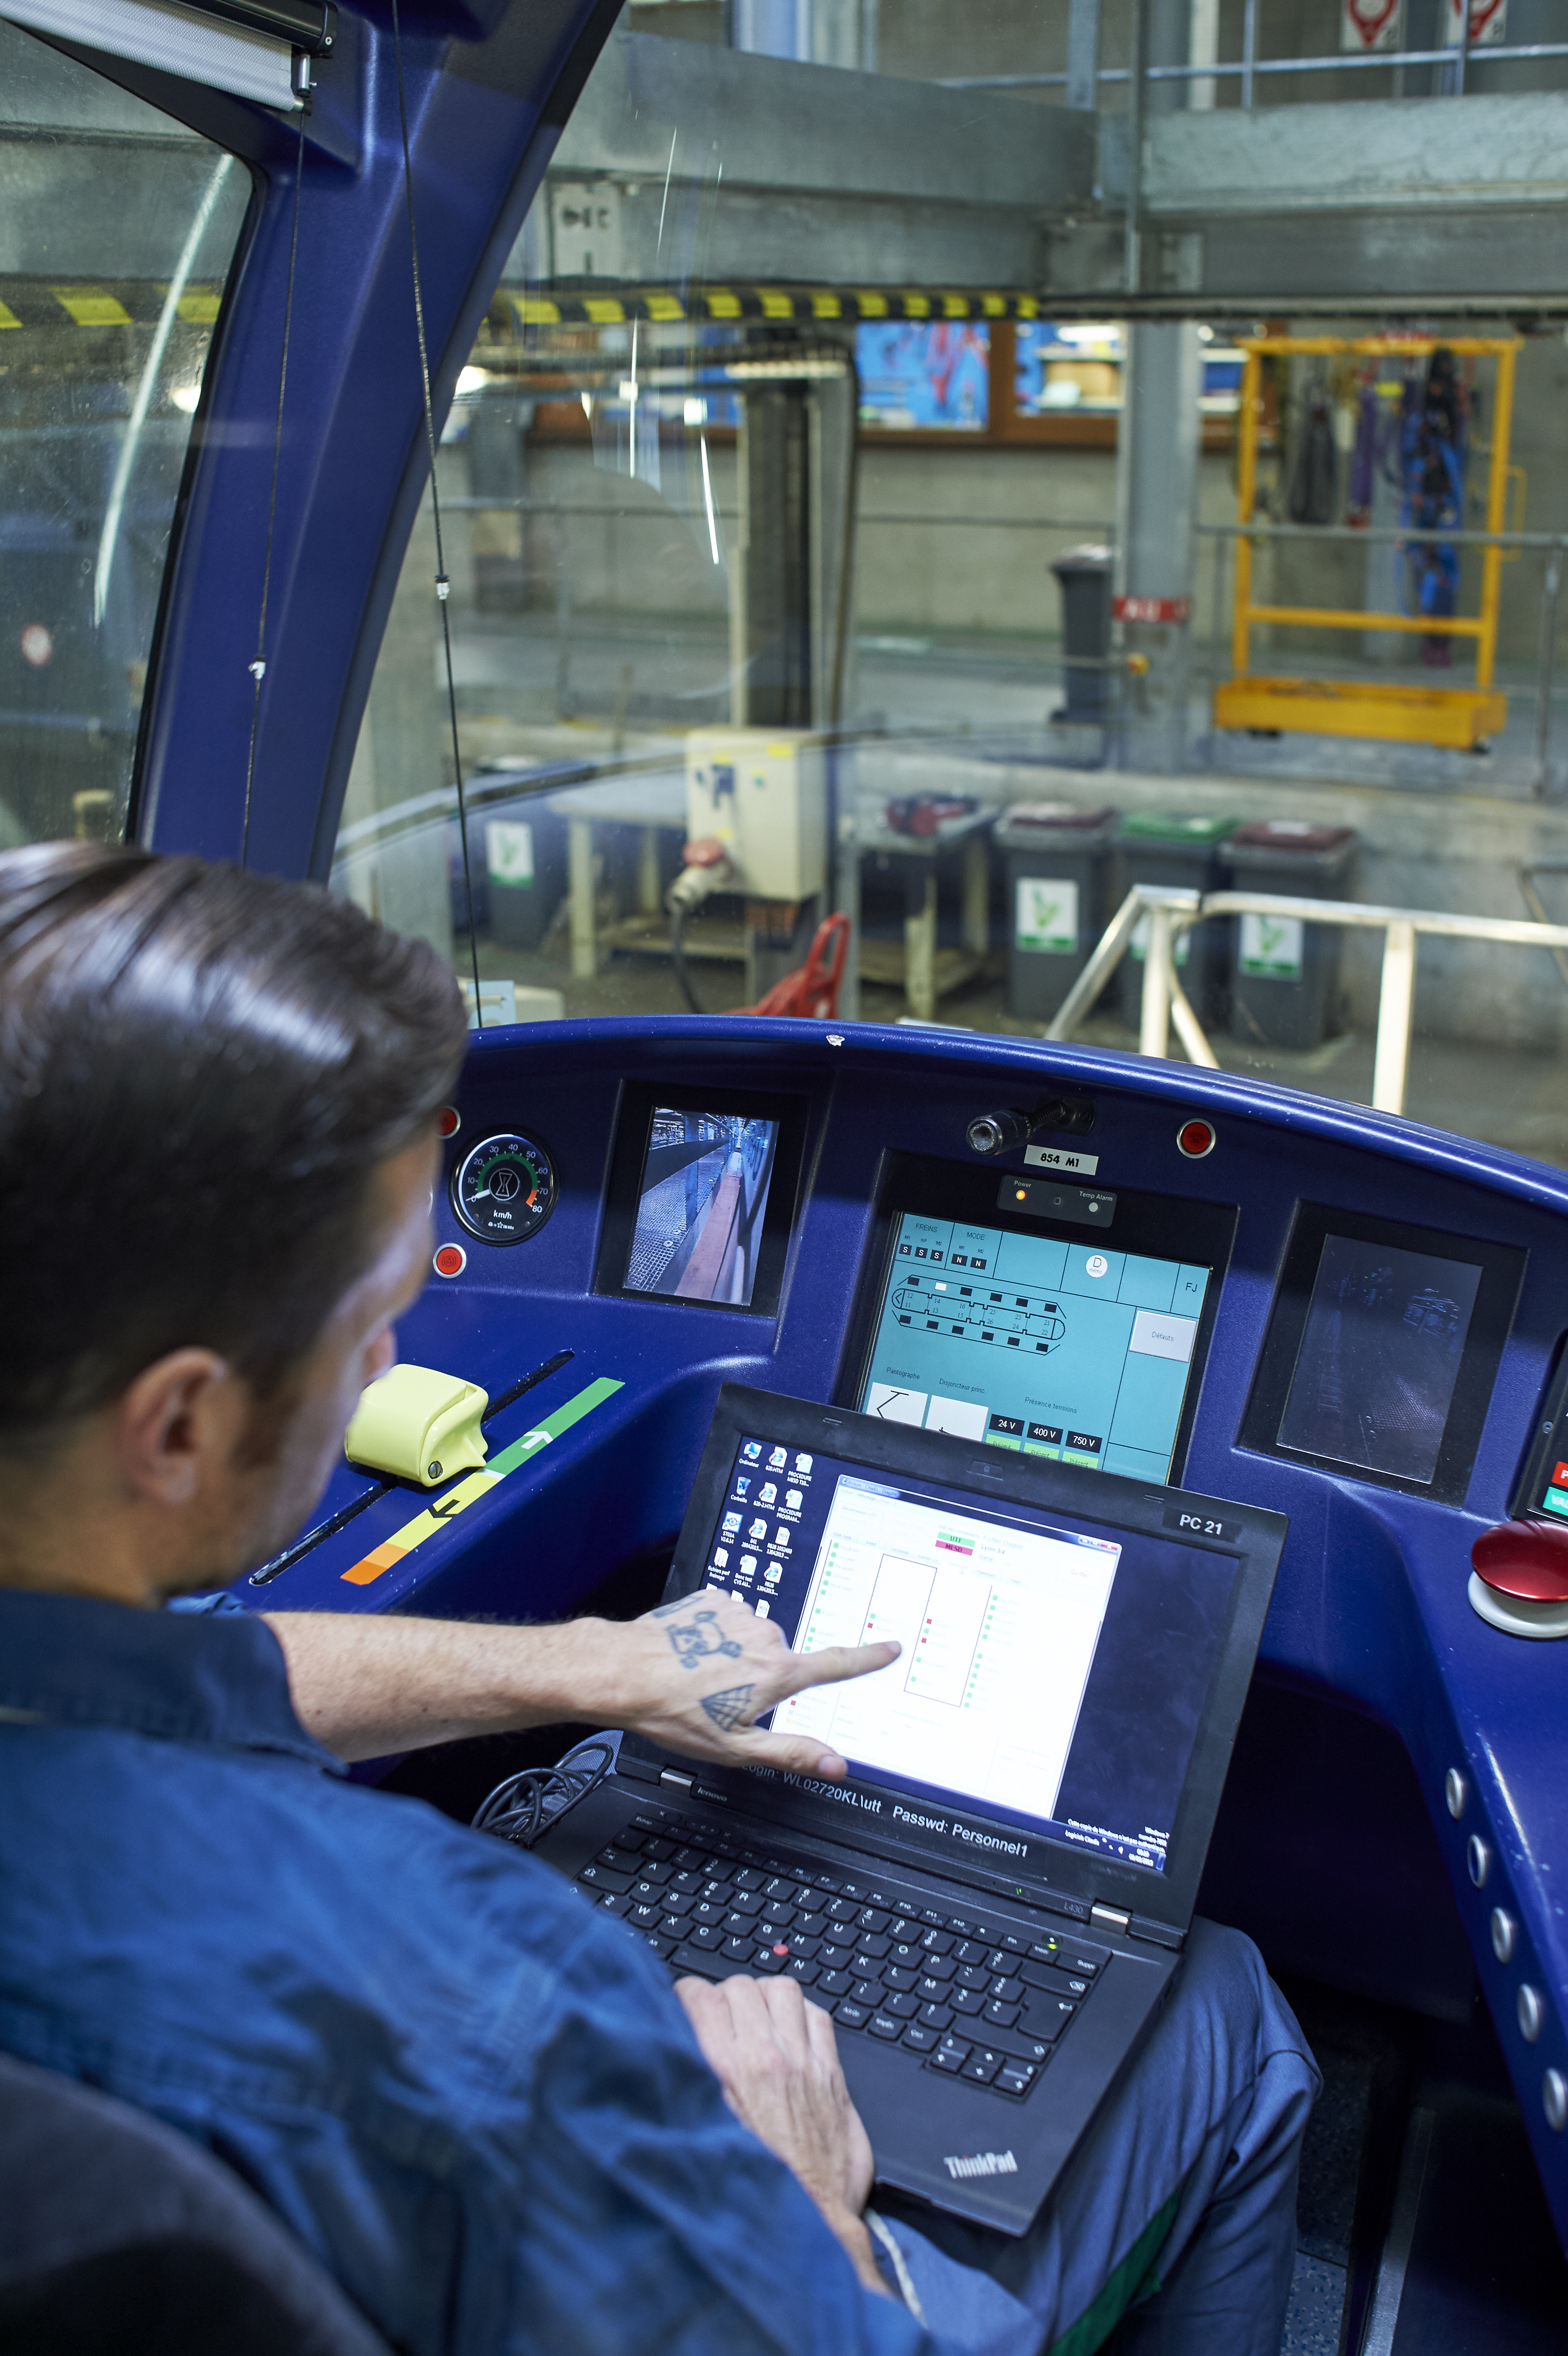 The digitalization of predictive maintenance optimizes and secures the interventions of maintenance technicians, and improves the availability of vehicles.